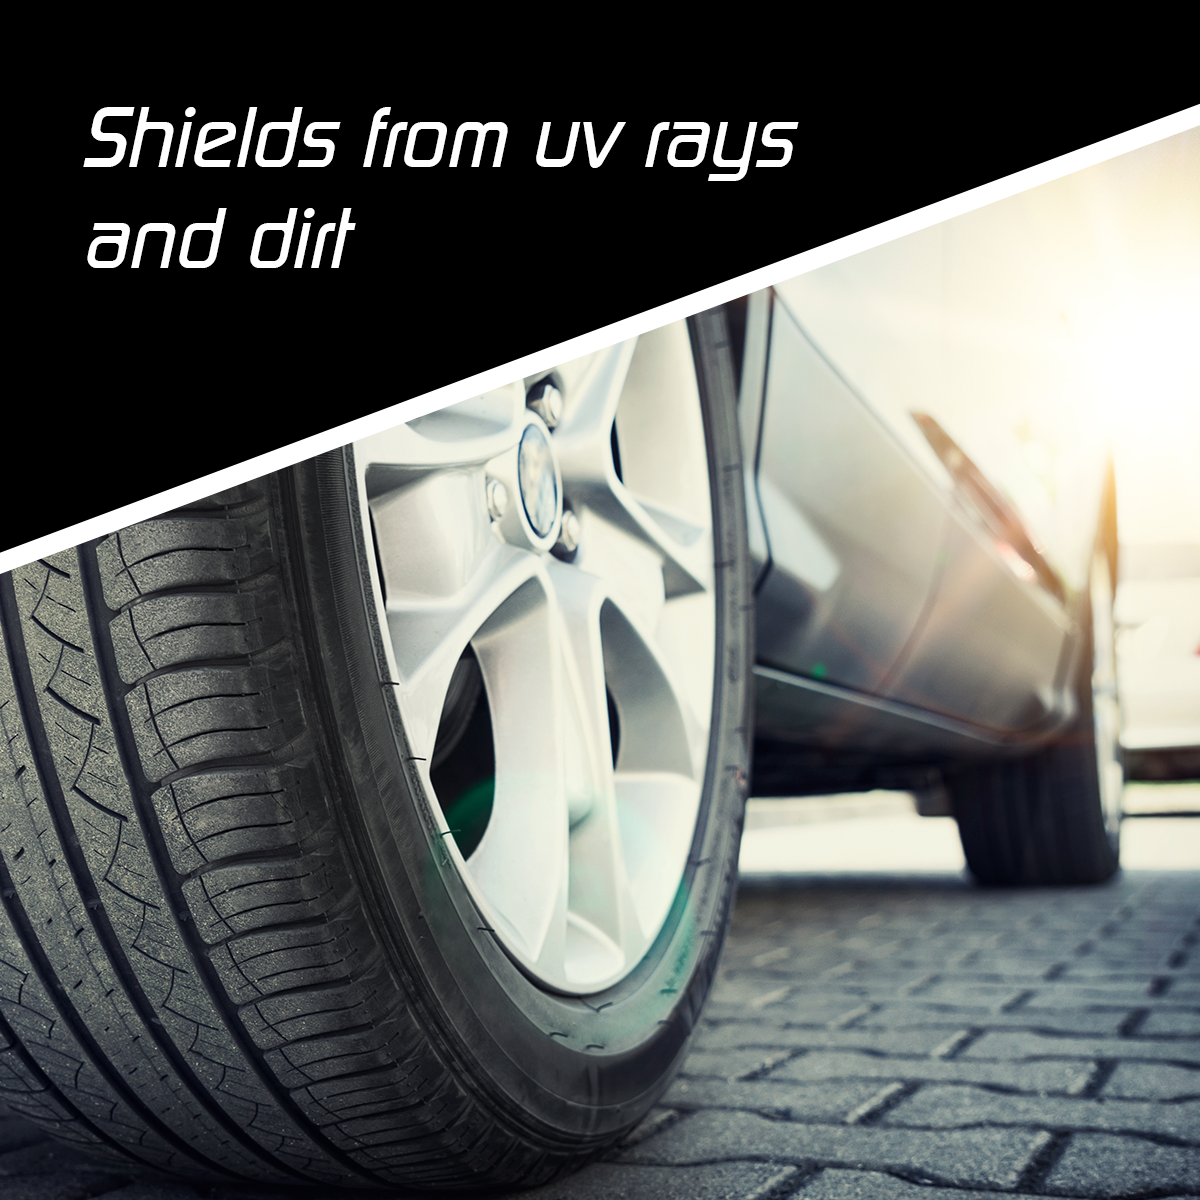 Shields from uv rays and dirt